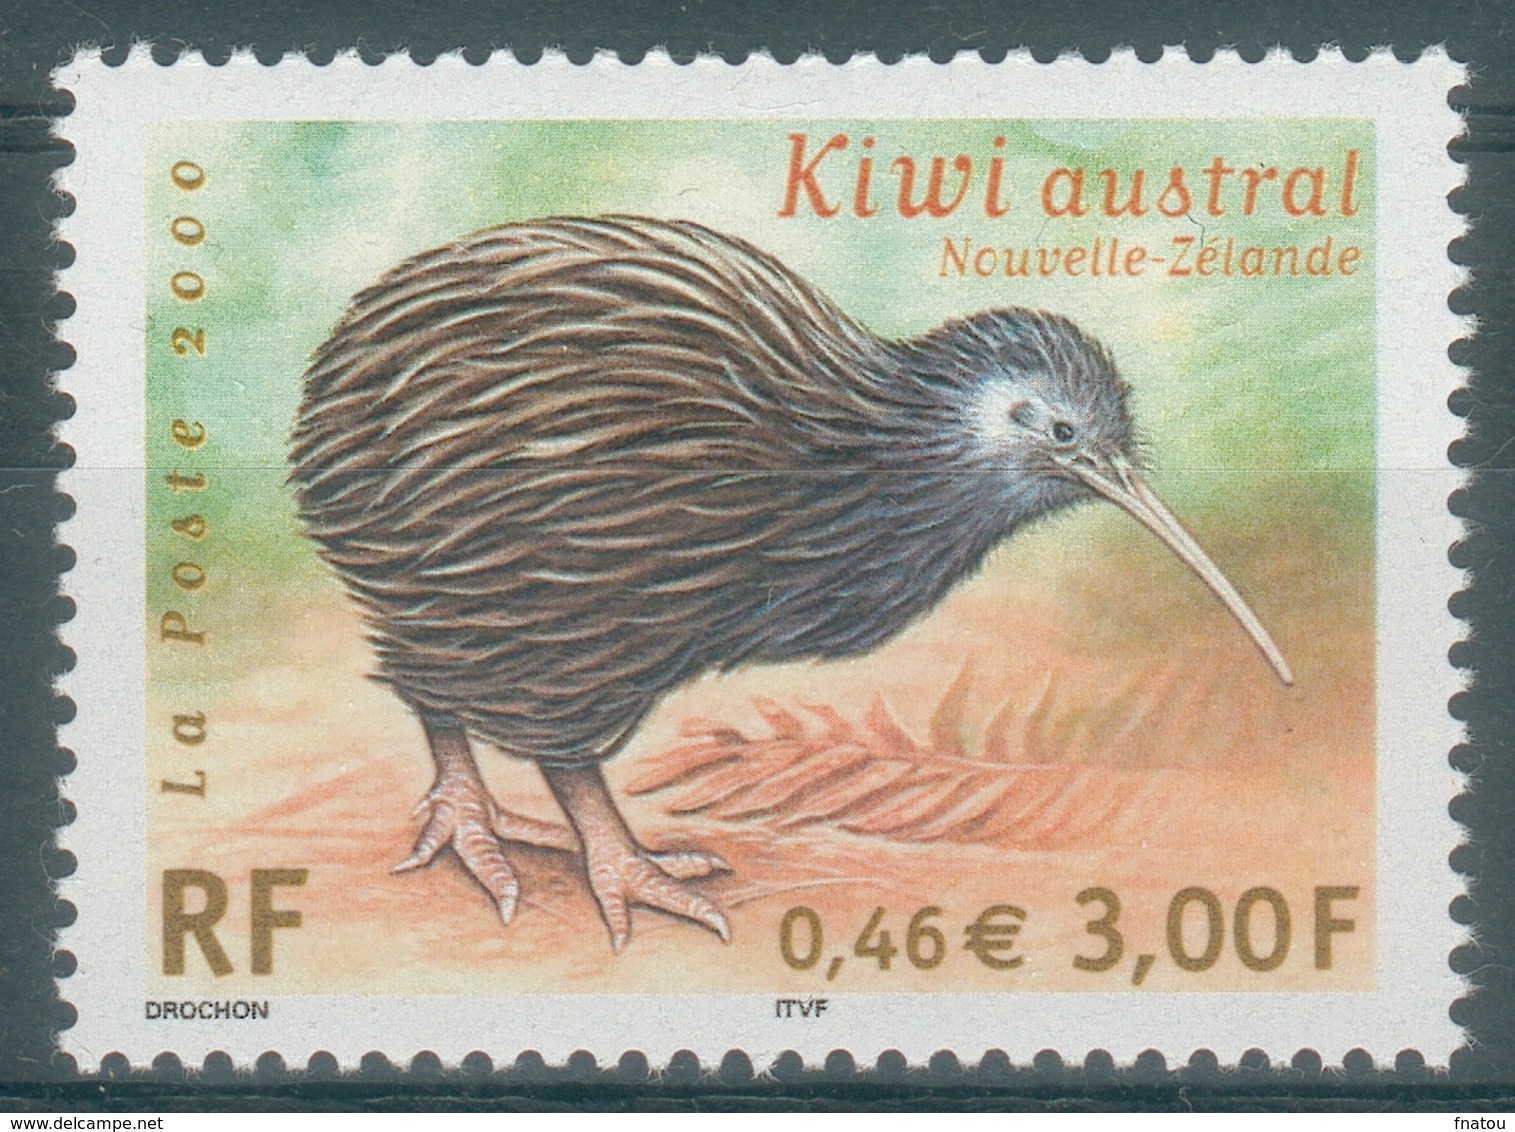 France, Bird, Kiwi, 2000, MNH VF  Joint Issue France-New Zealand - Unused Stamps